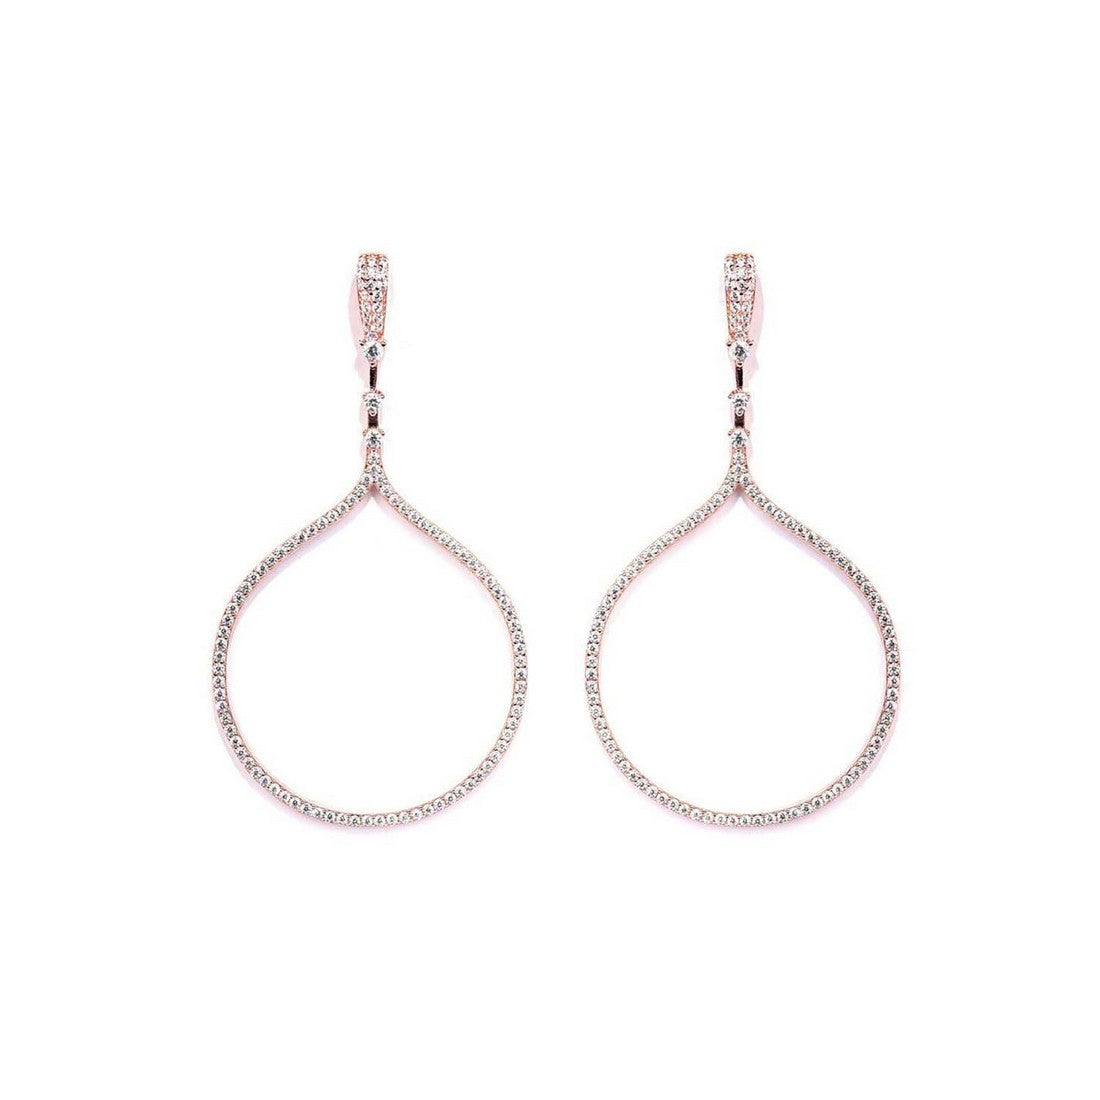 The Waverly Sparkle 925 Silver Earrings